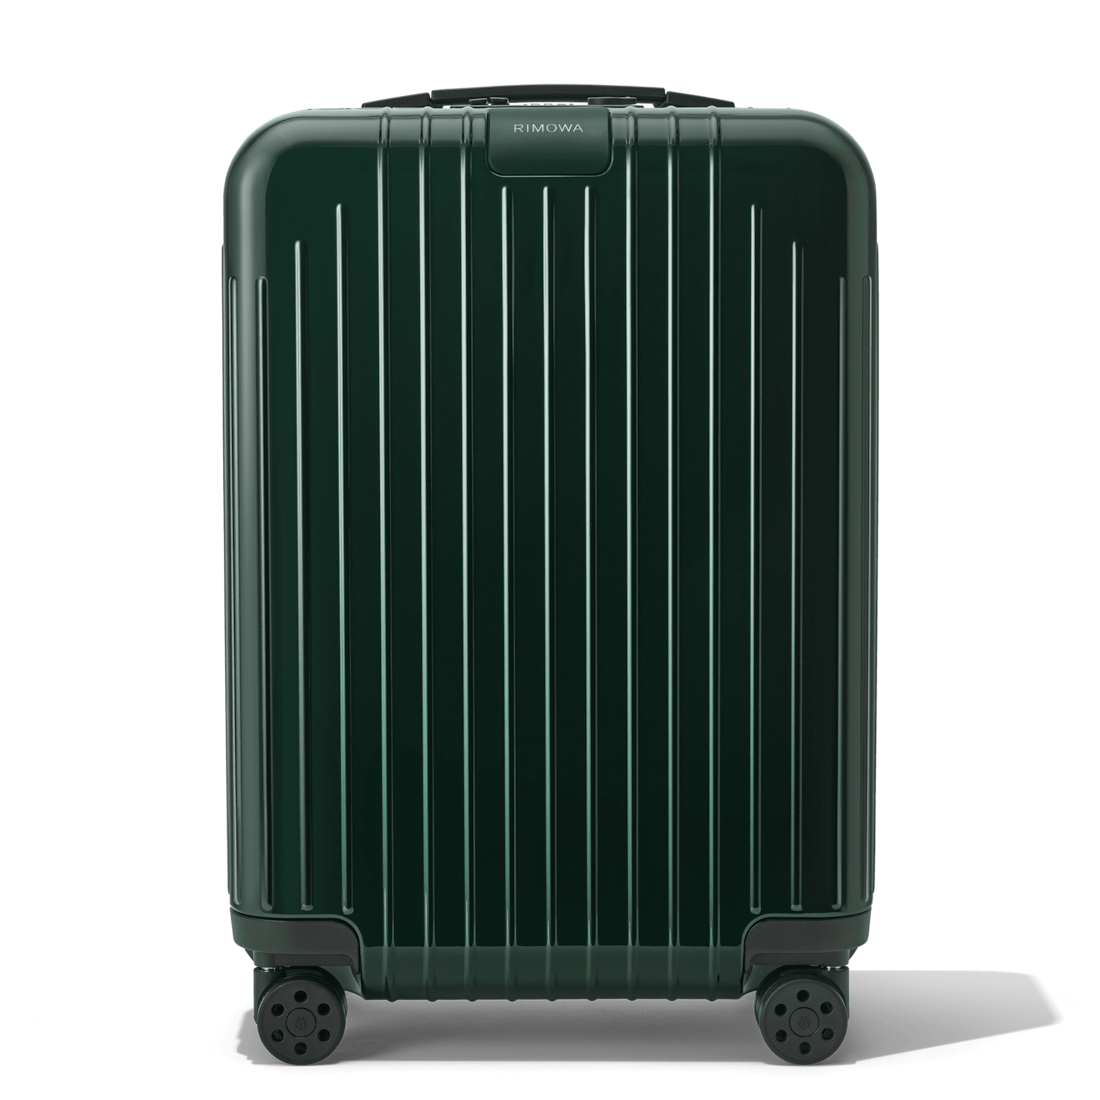 Introducing the New Essential Colours, RIMOWA